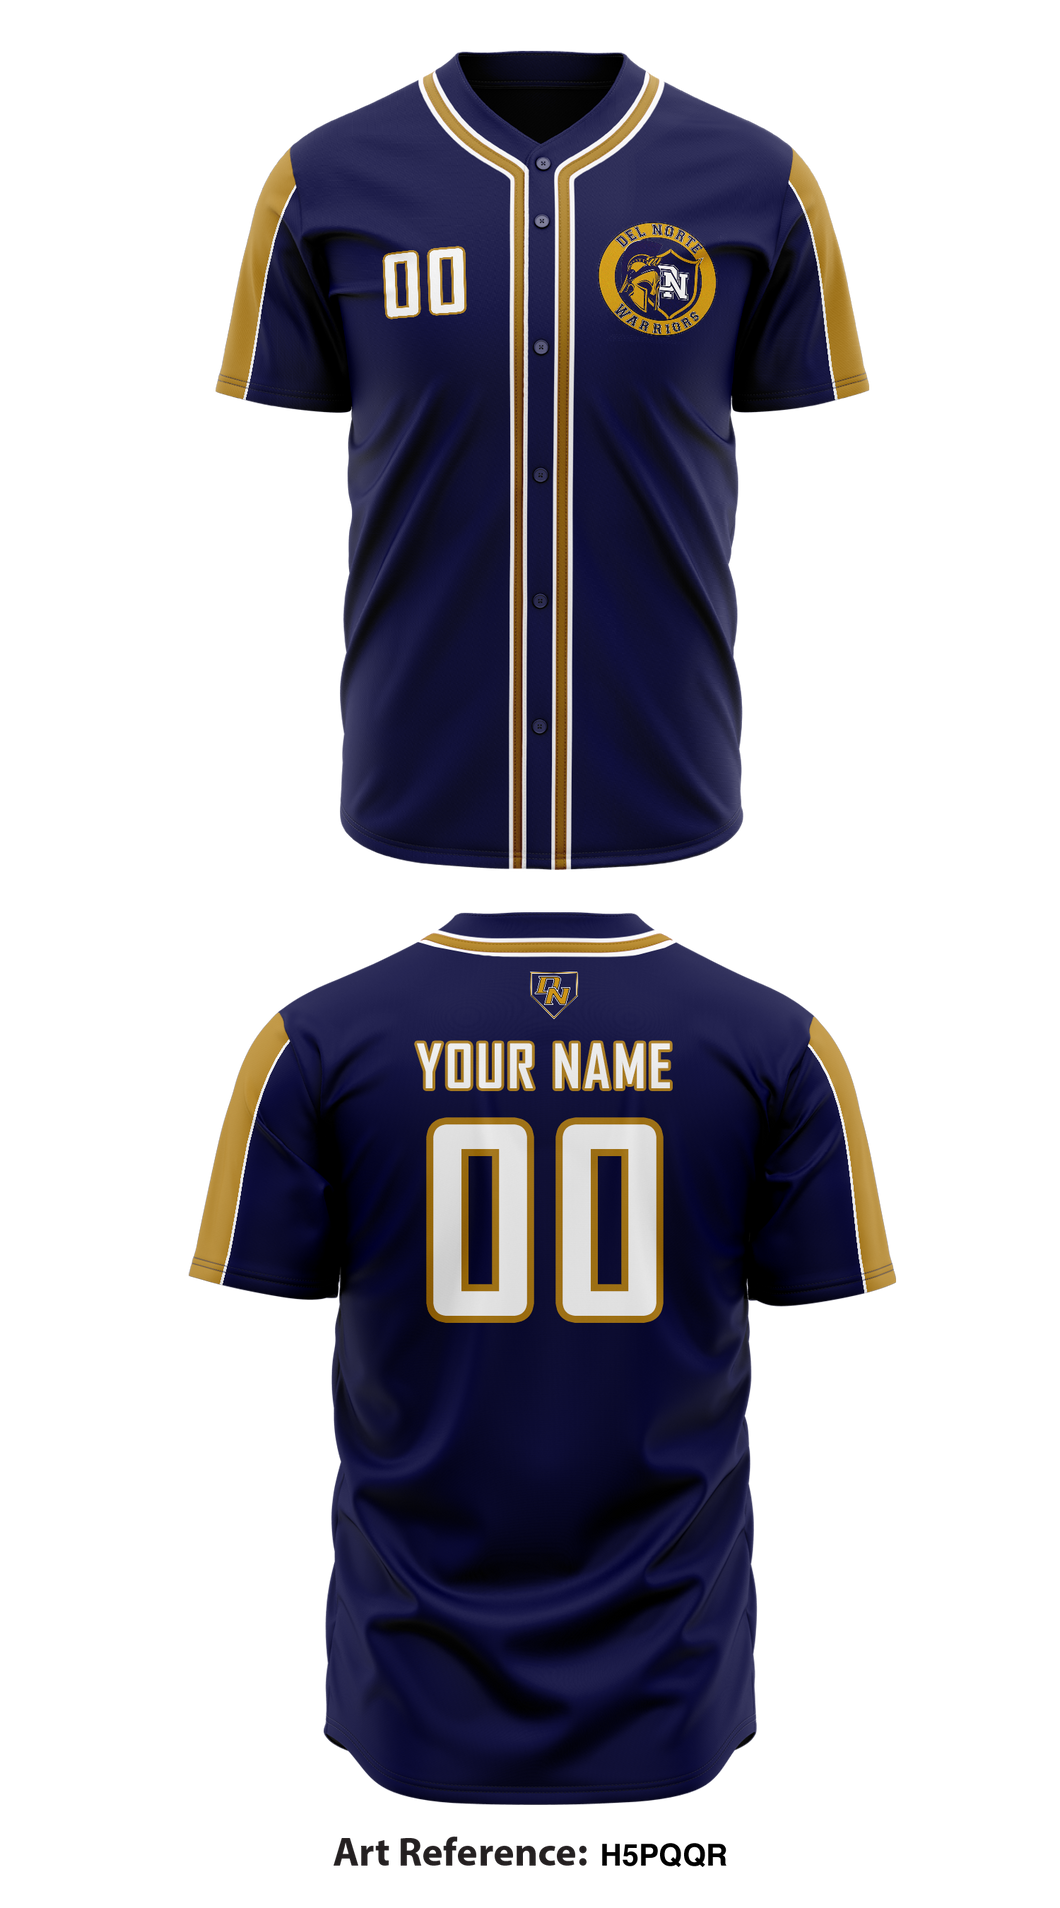 Warrior Jersey, Sublimated Two-button Baseball Jersey